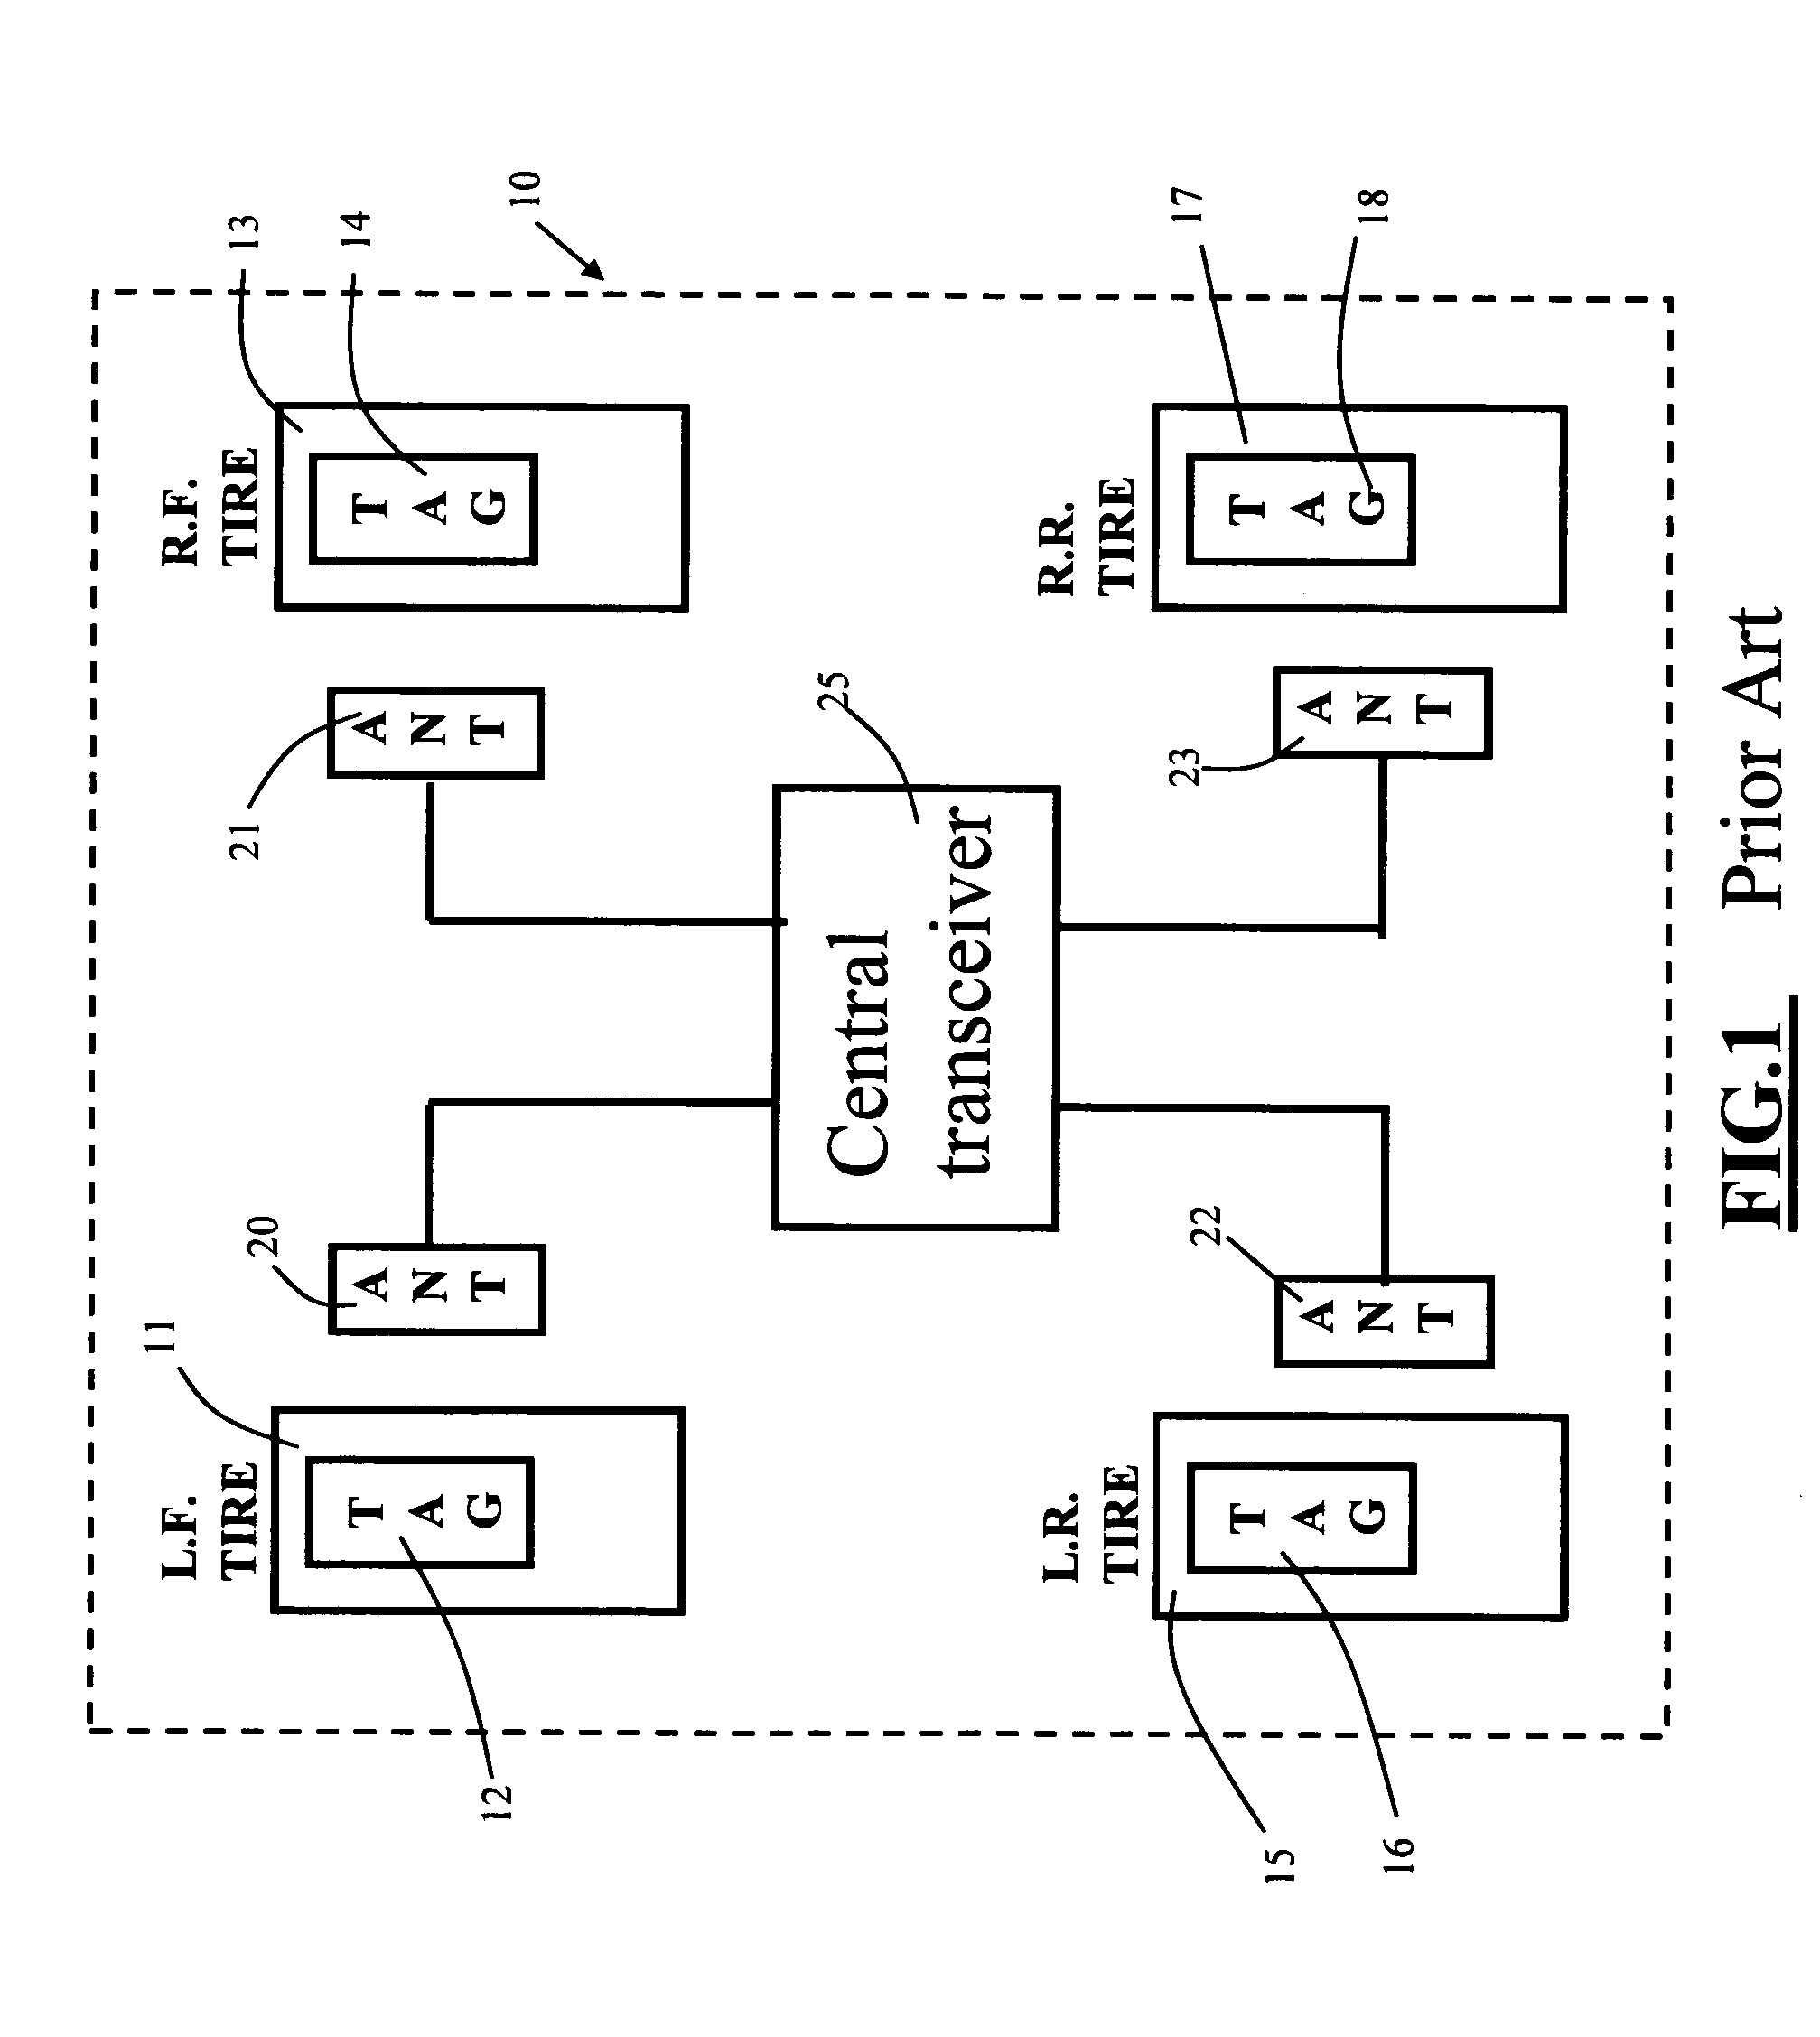 Tire parameter monitoring system with inductive power source